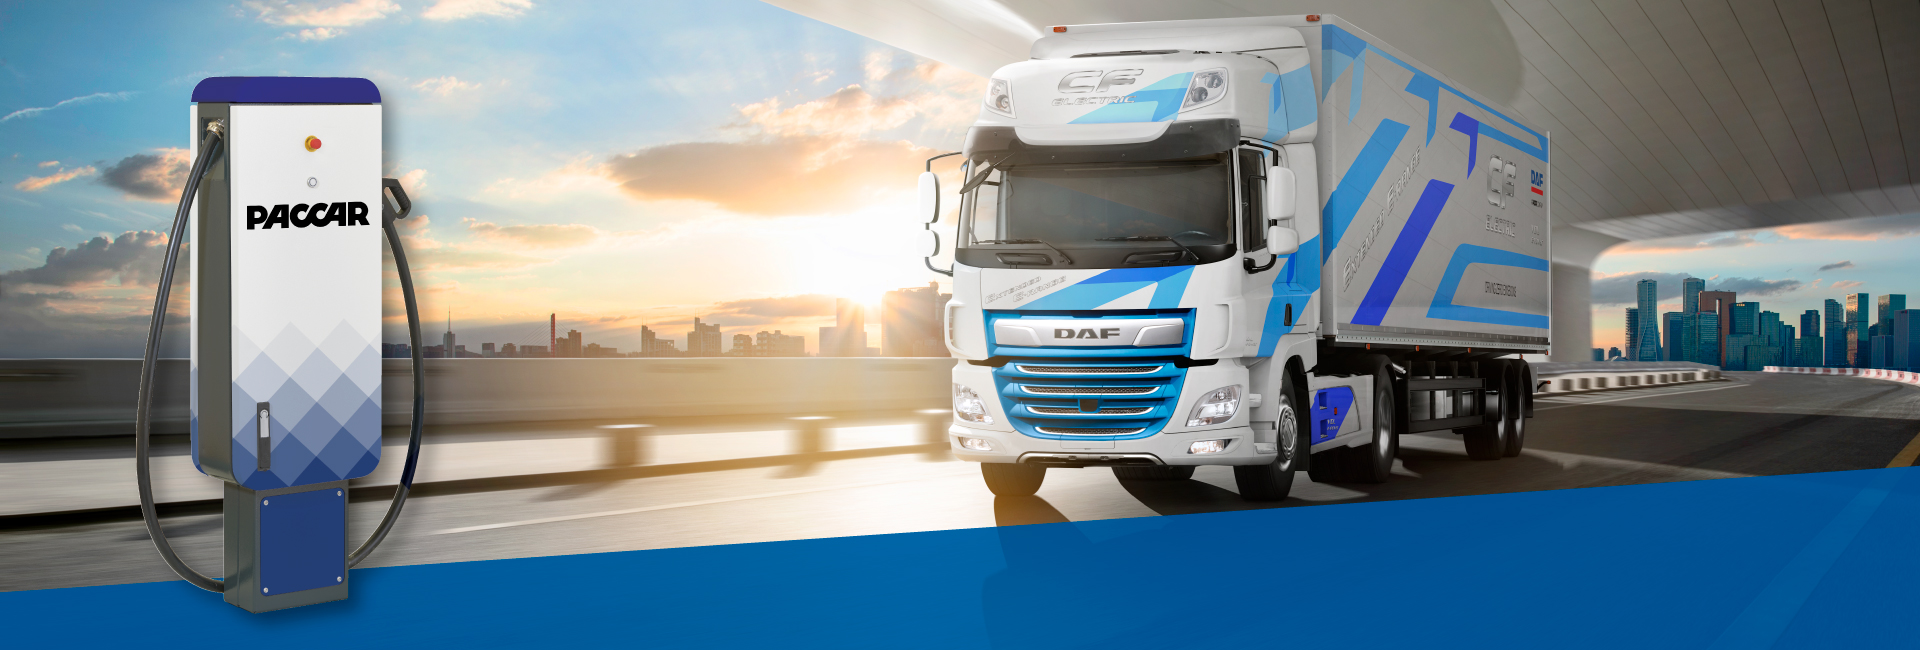 PACCAR-chargers-HEADER-Landingpage-1920x650-165338